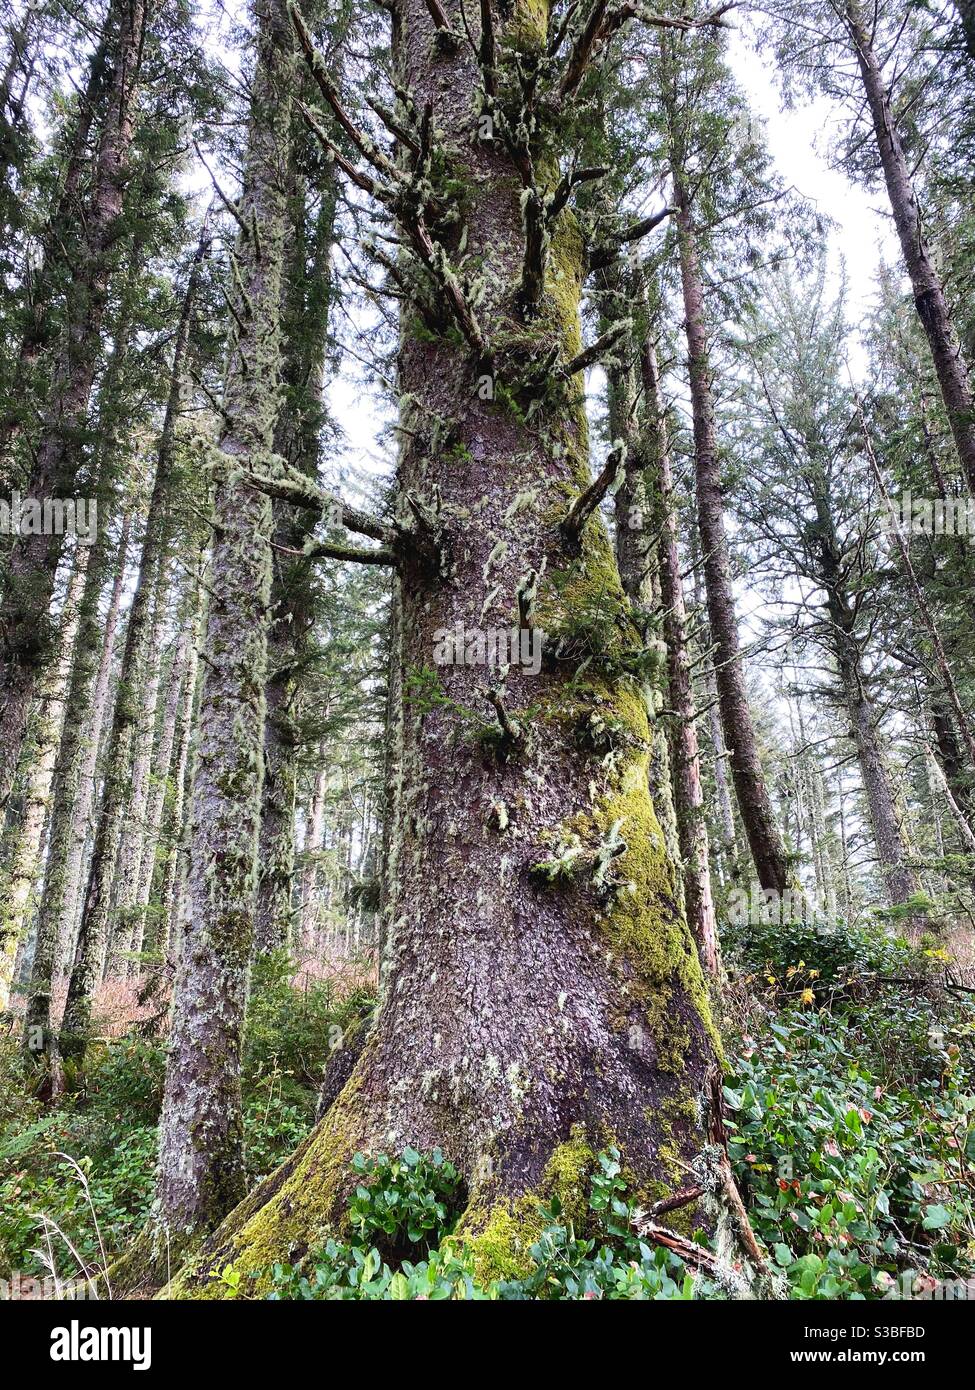 Mossy trees in a forest in Cape Perpetua, Oregon. Stock Photo